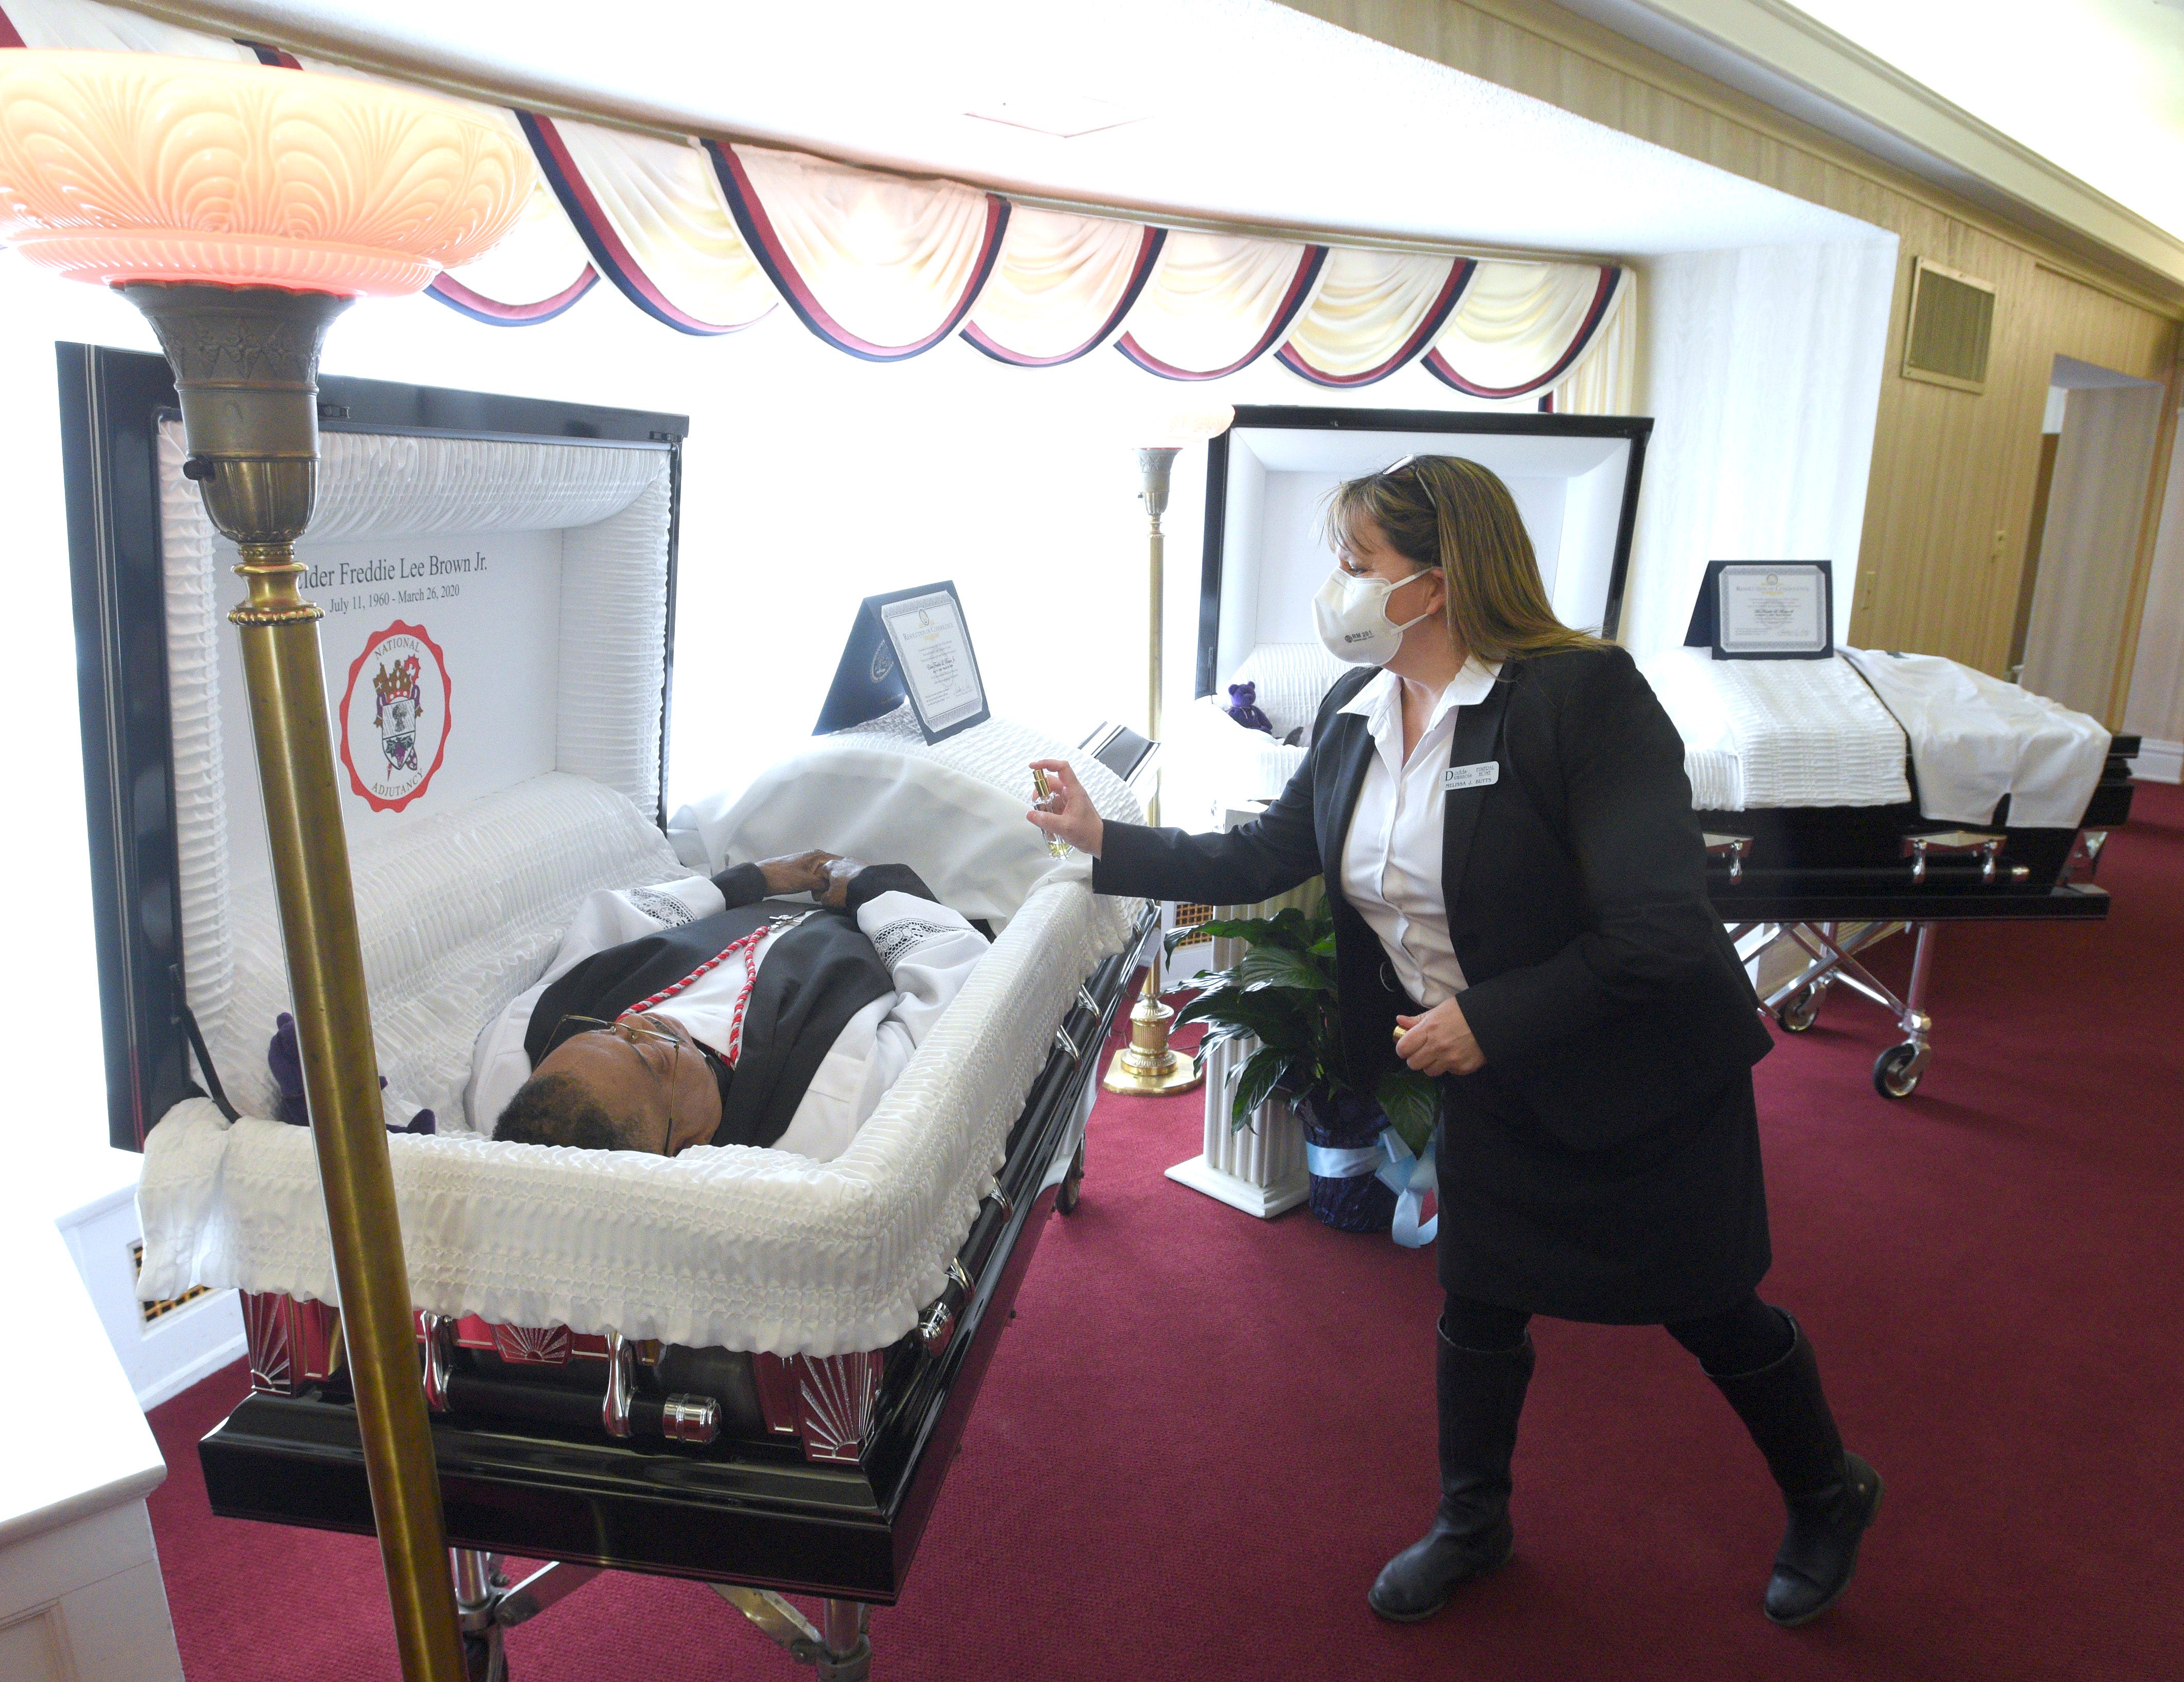 Following the wishes of wife and mother Sandy Brown (not pictured), funeral home owner Melissa Butts sprays Freddie Lee Brown Jr. ' s casket with the cologne Aramis, Brown Jr. ' s favorite. Butts also sprayed Freddie Lee Brown III ' s casket with his favorite fragrance, Guilty by Gucci. The father and son died three days apart from COVID-19 and are laid to rest together on Friday, April 10, 2020.